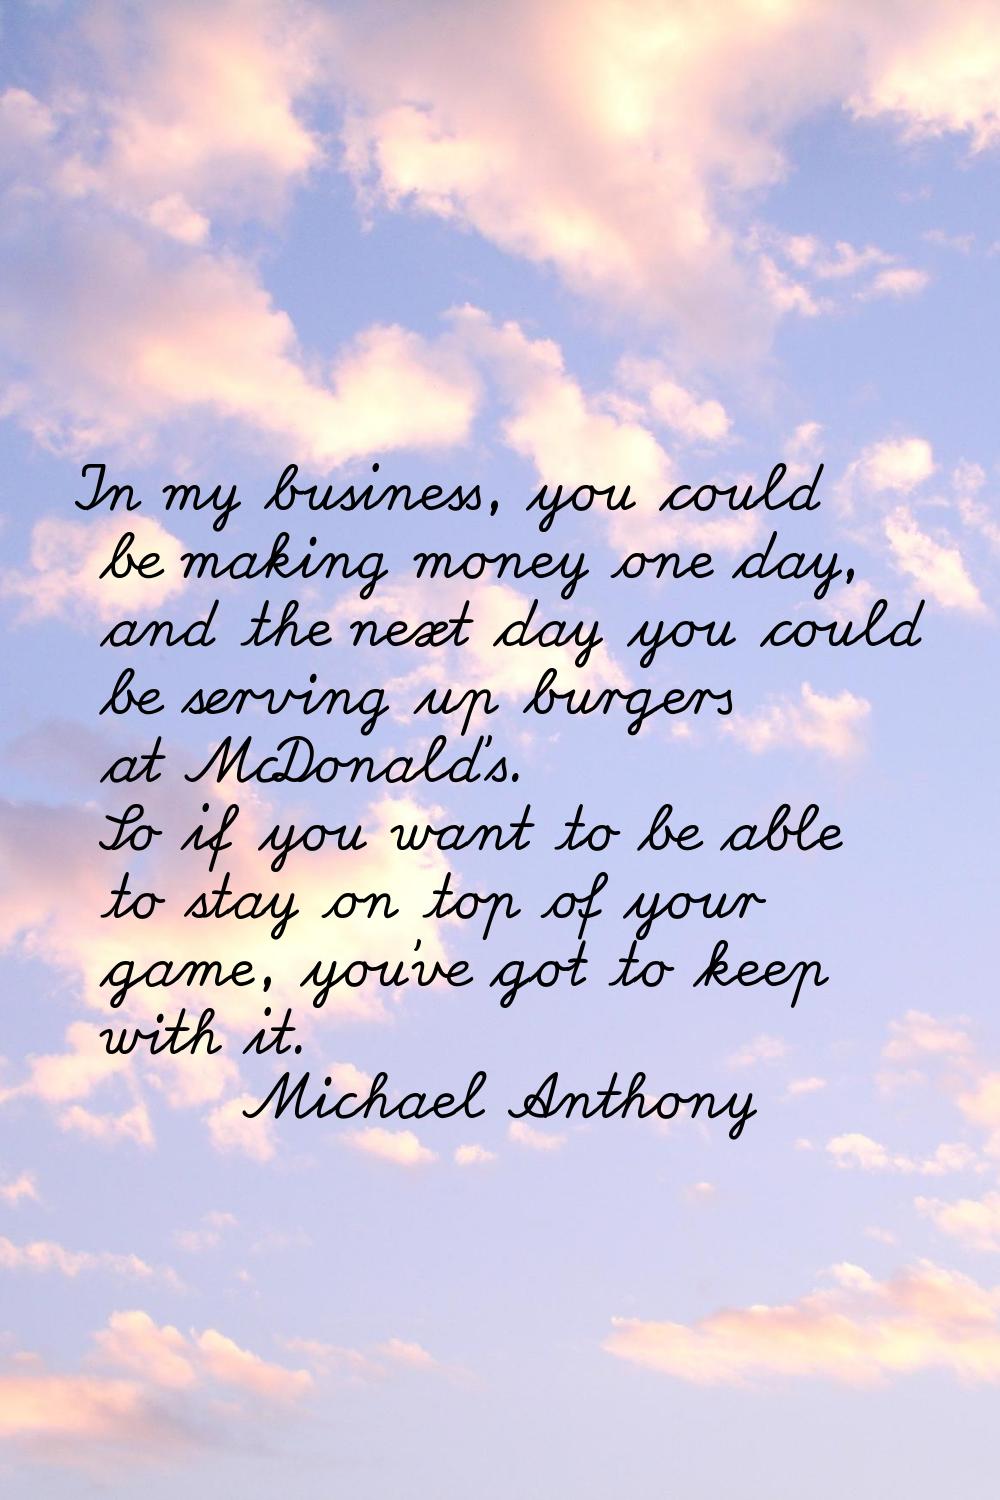 In my business, you could be making money one day, and the next day you could be serving up burgers